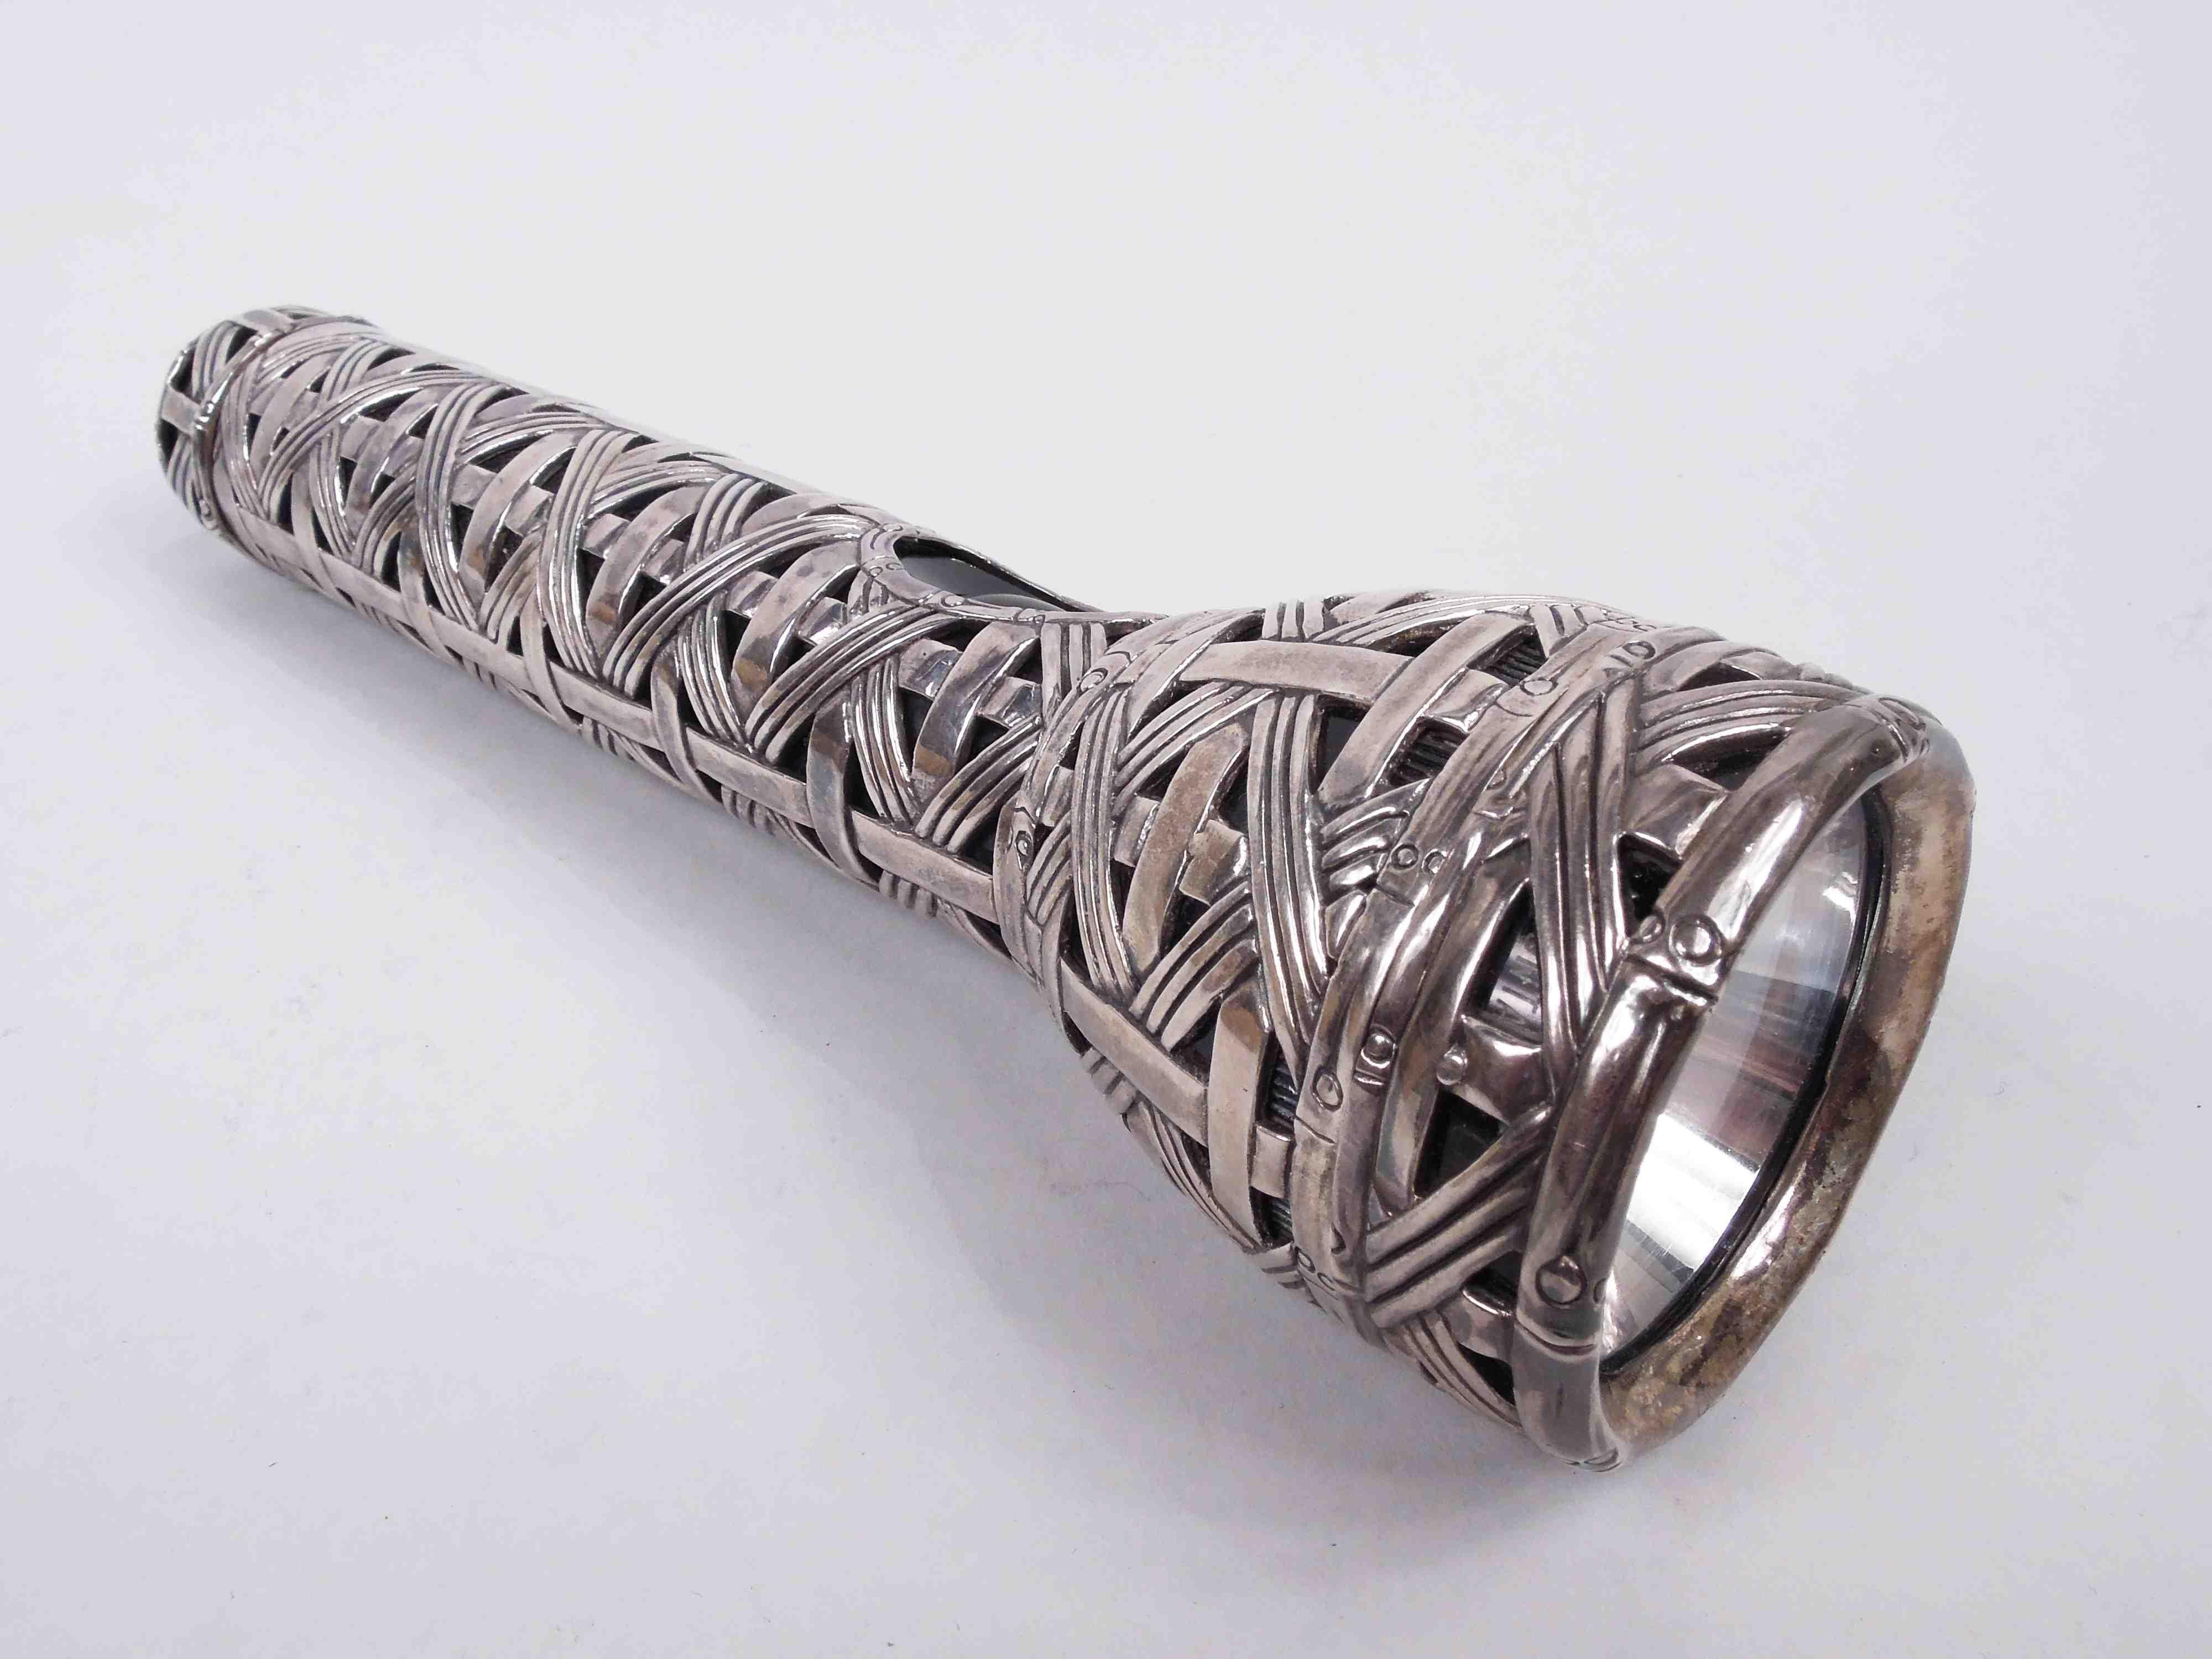 Jokey Y2K flashlight. Traditional flashlight encased in heavy silver weave. At end is applied medallion with the year 2000 encircled by the phrase “Light Your Way into the New Millennium”. An allusion to the infrastructure uncertainties when the